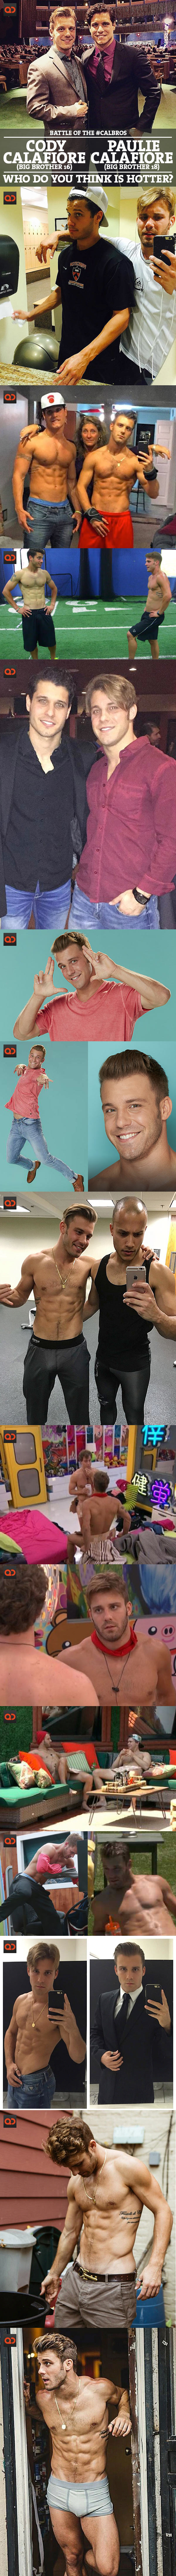 qc-battle_of_the_calbros-big_brother_paulie_calafiore_cody_calafiore_naked-collage03